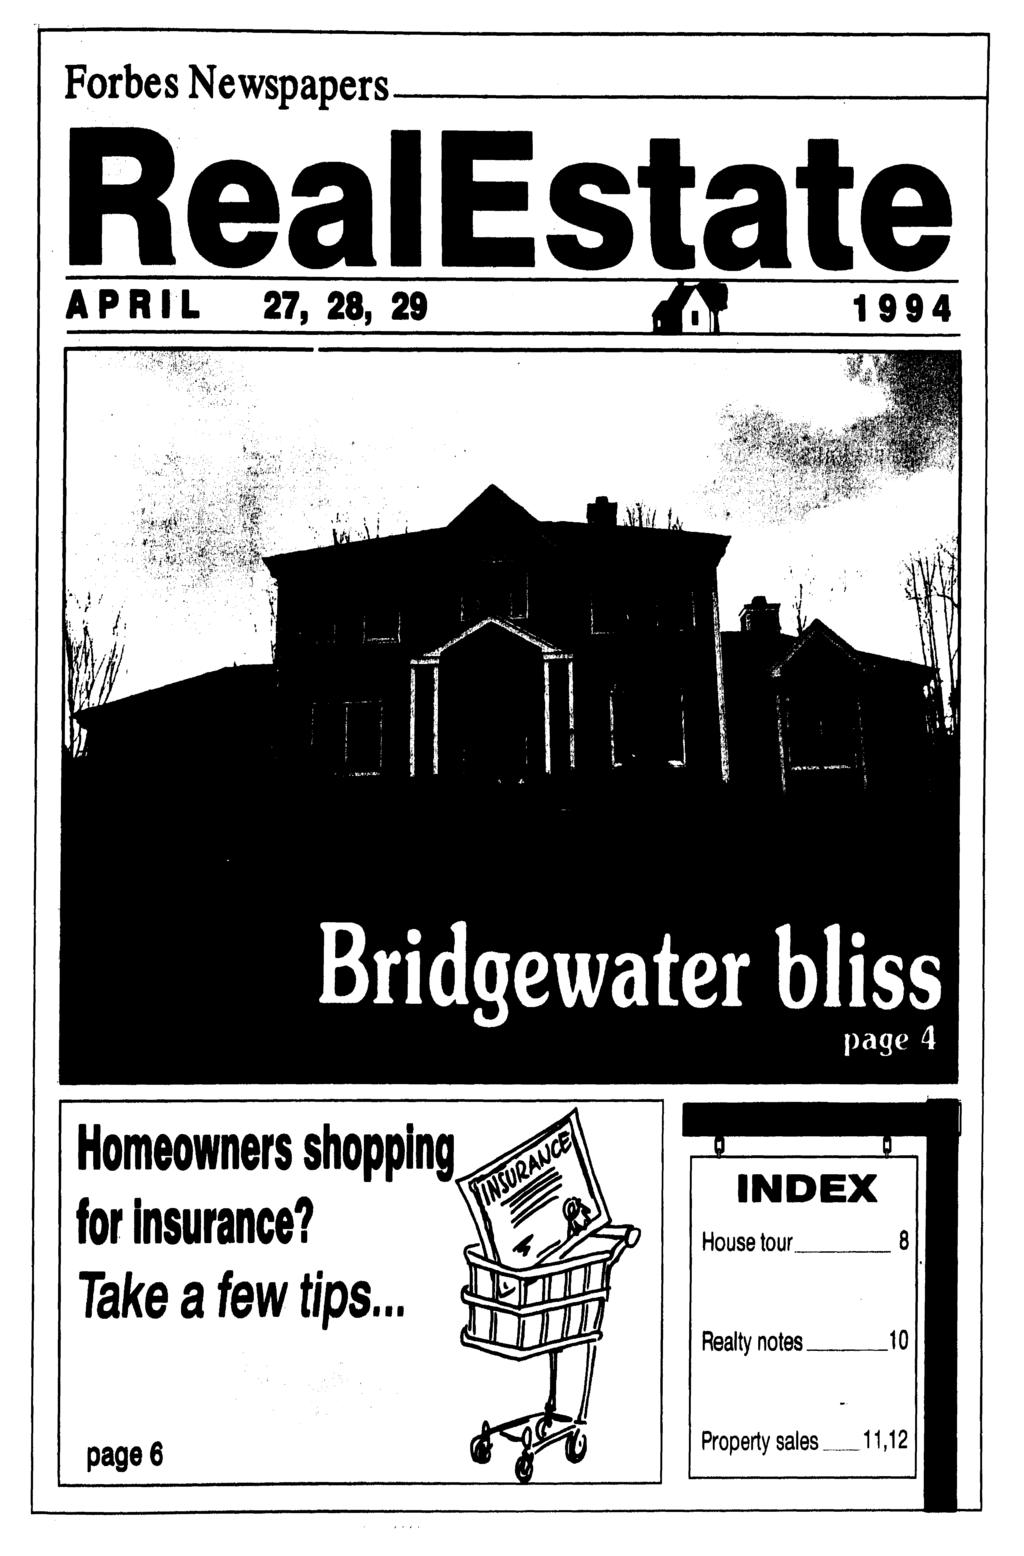 Forbes Newspapers APRIL 27, 28, 29 1994 Homeowners shopping for